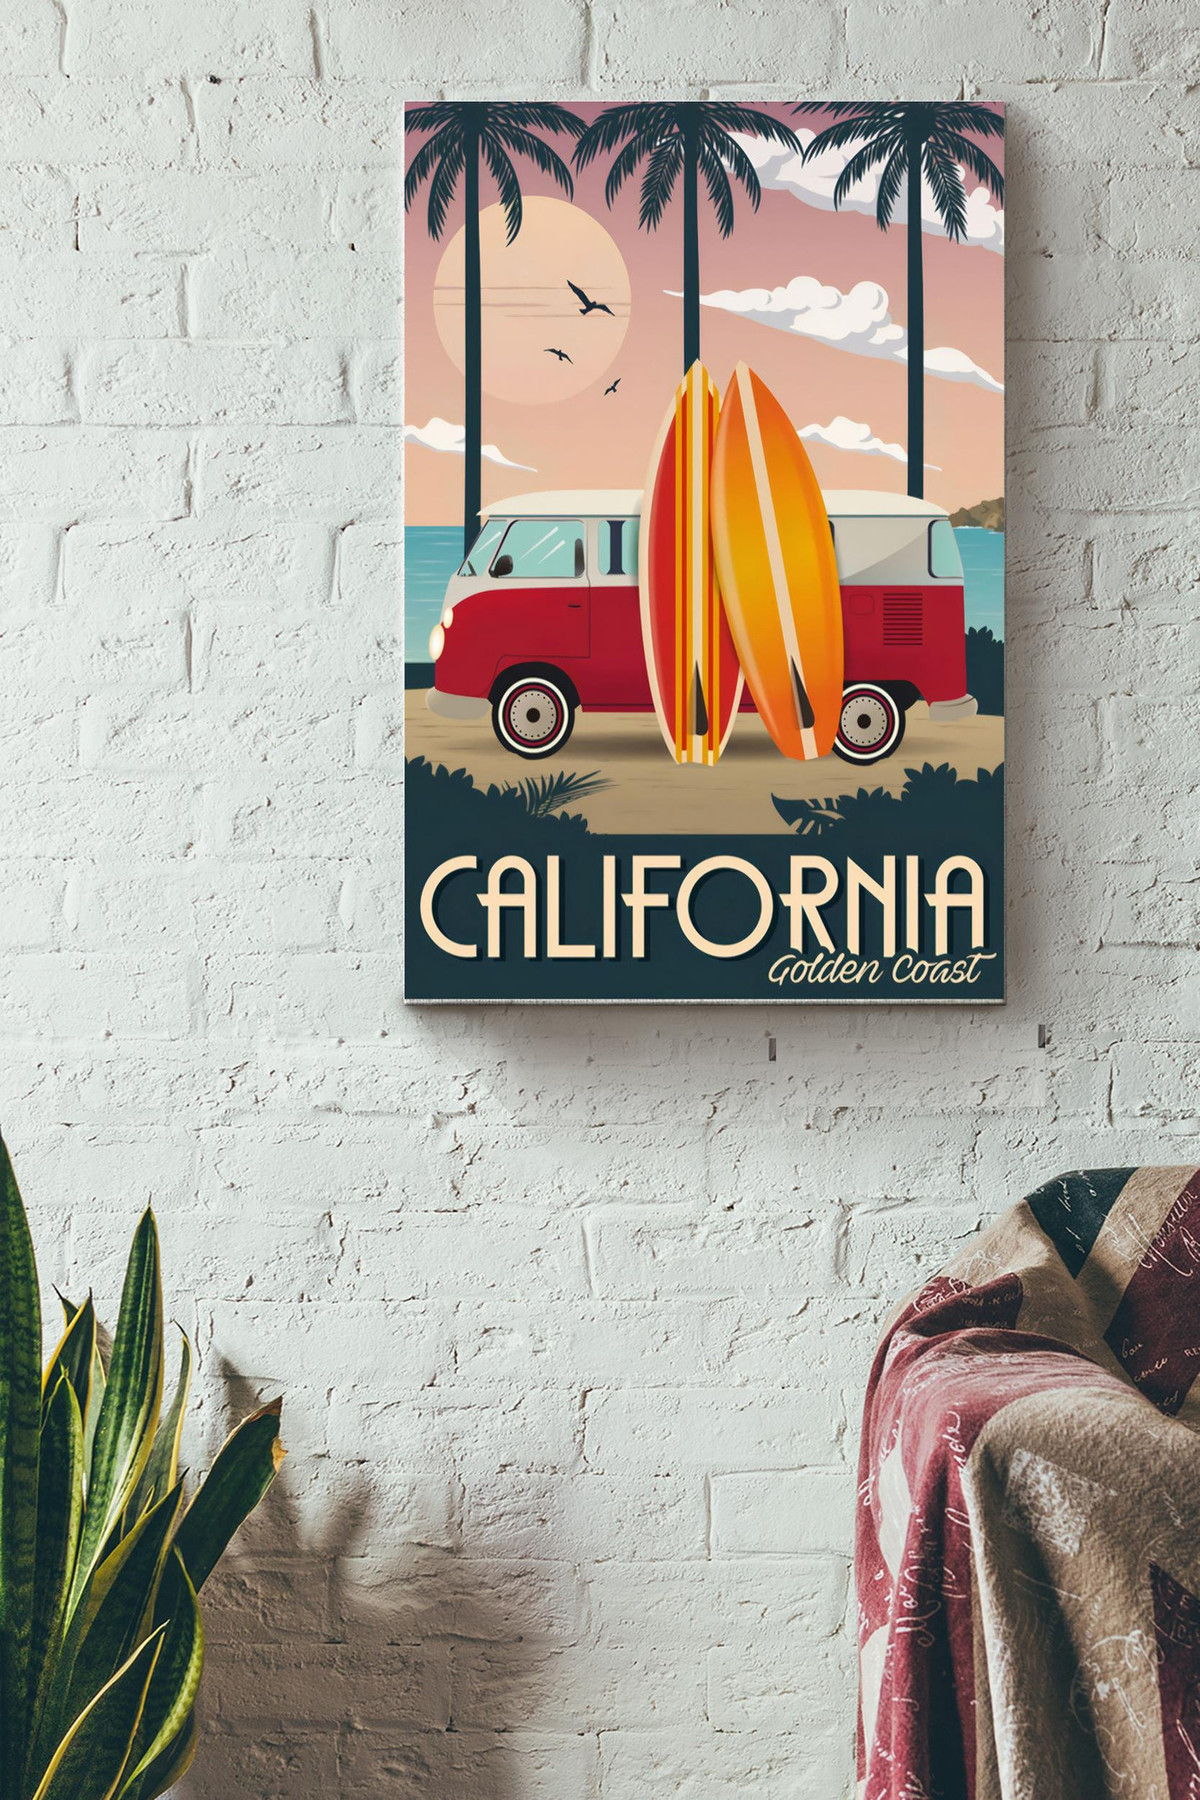 California Golden Coast Canvas Traveling Gift For Tourist Souvenir Traveling Lover Surfing Lover Canvas Gallery Painting Wrapped Canvas Framed Gift Idea Framed Prints, Canvas Paintings Wrapped Canvas 8x10